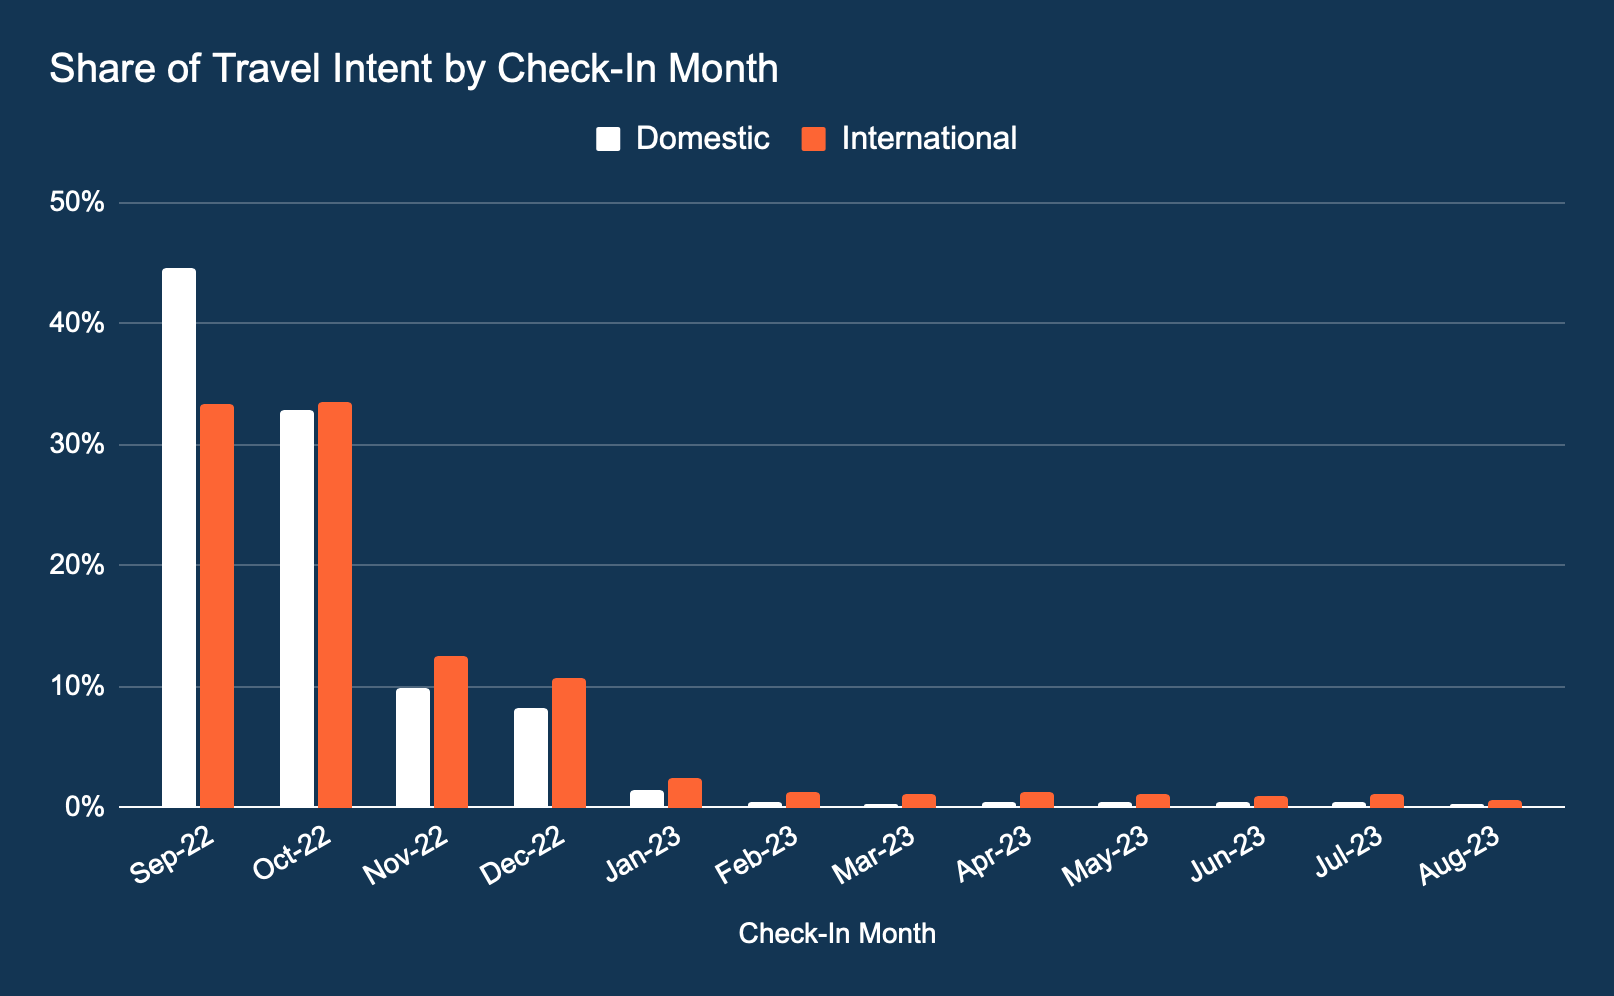 Share of travel intent by check-in month